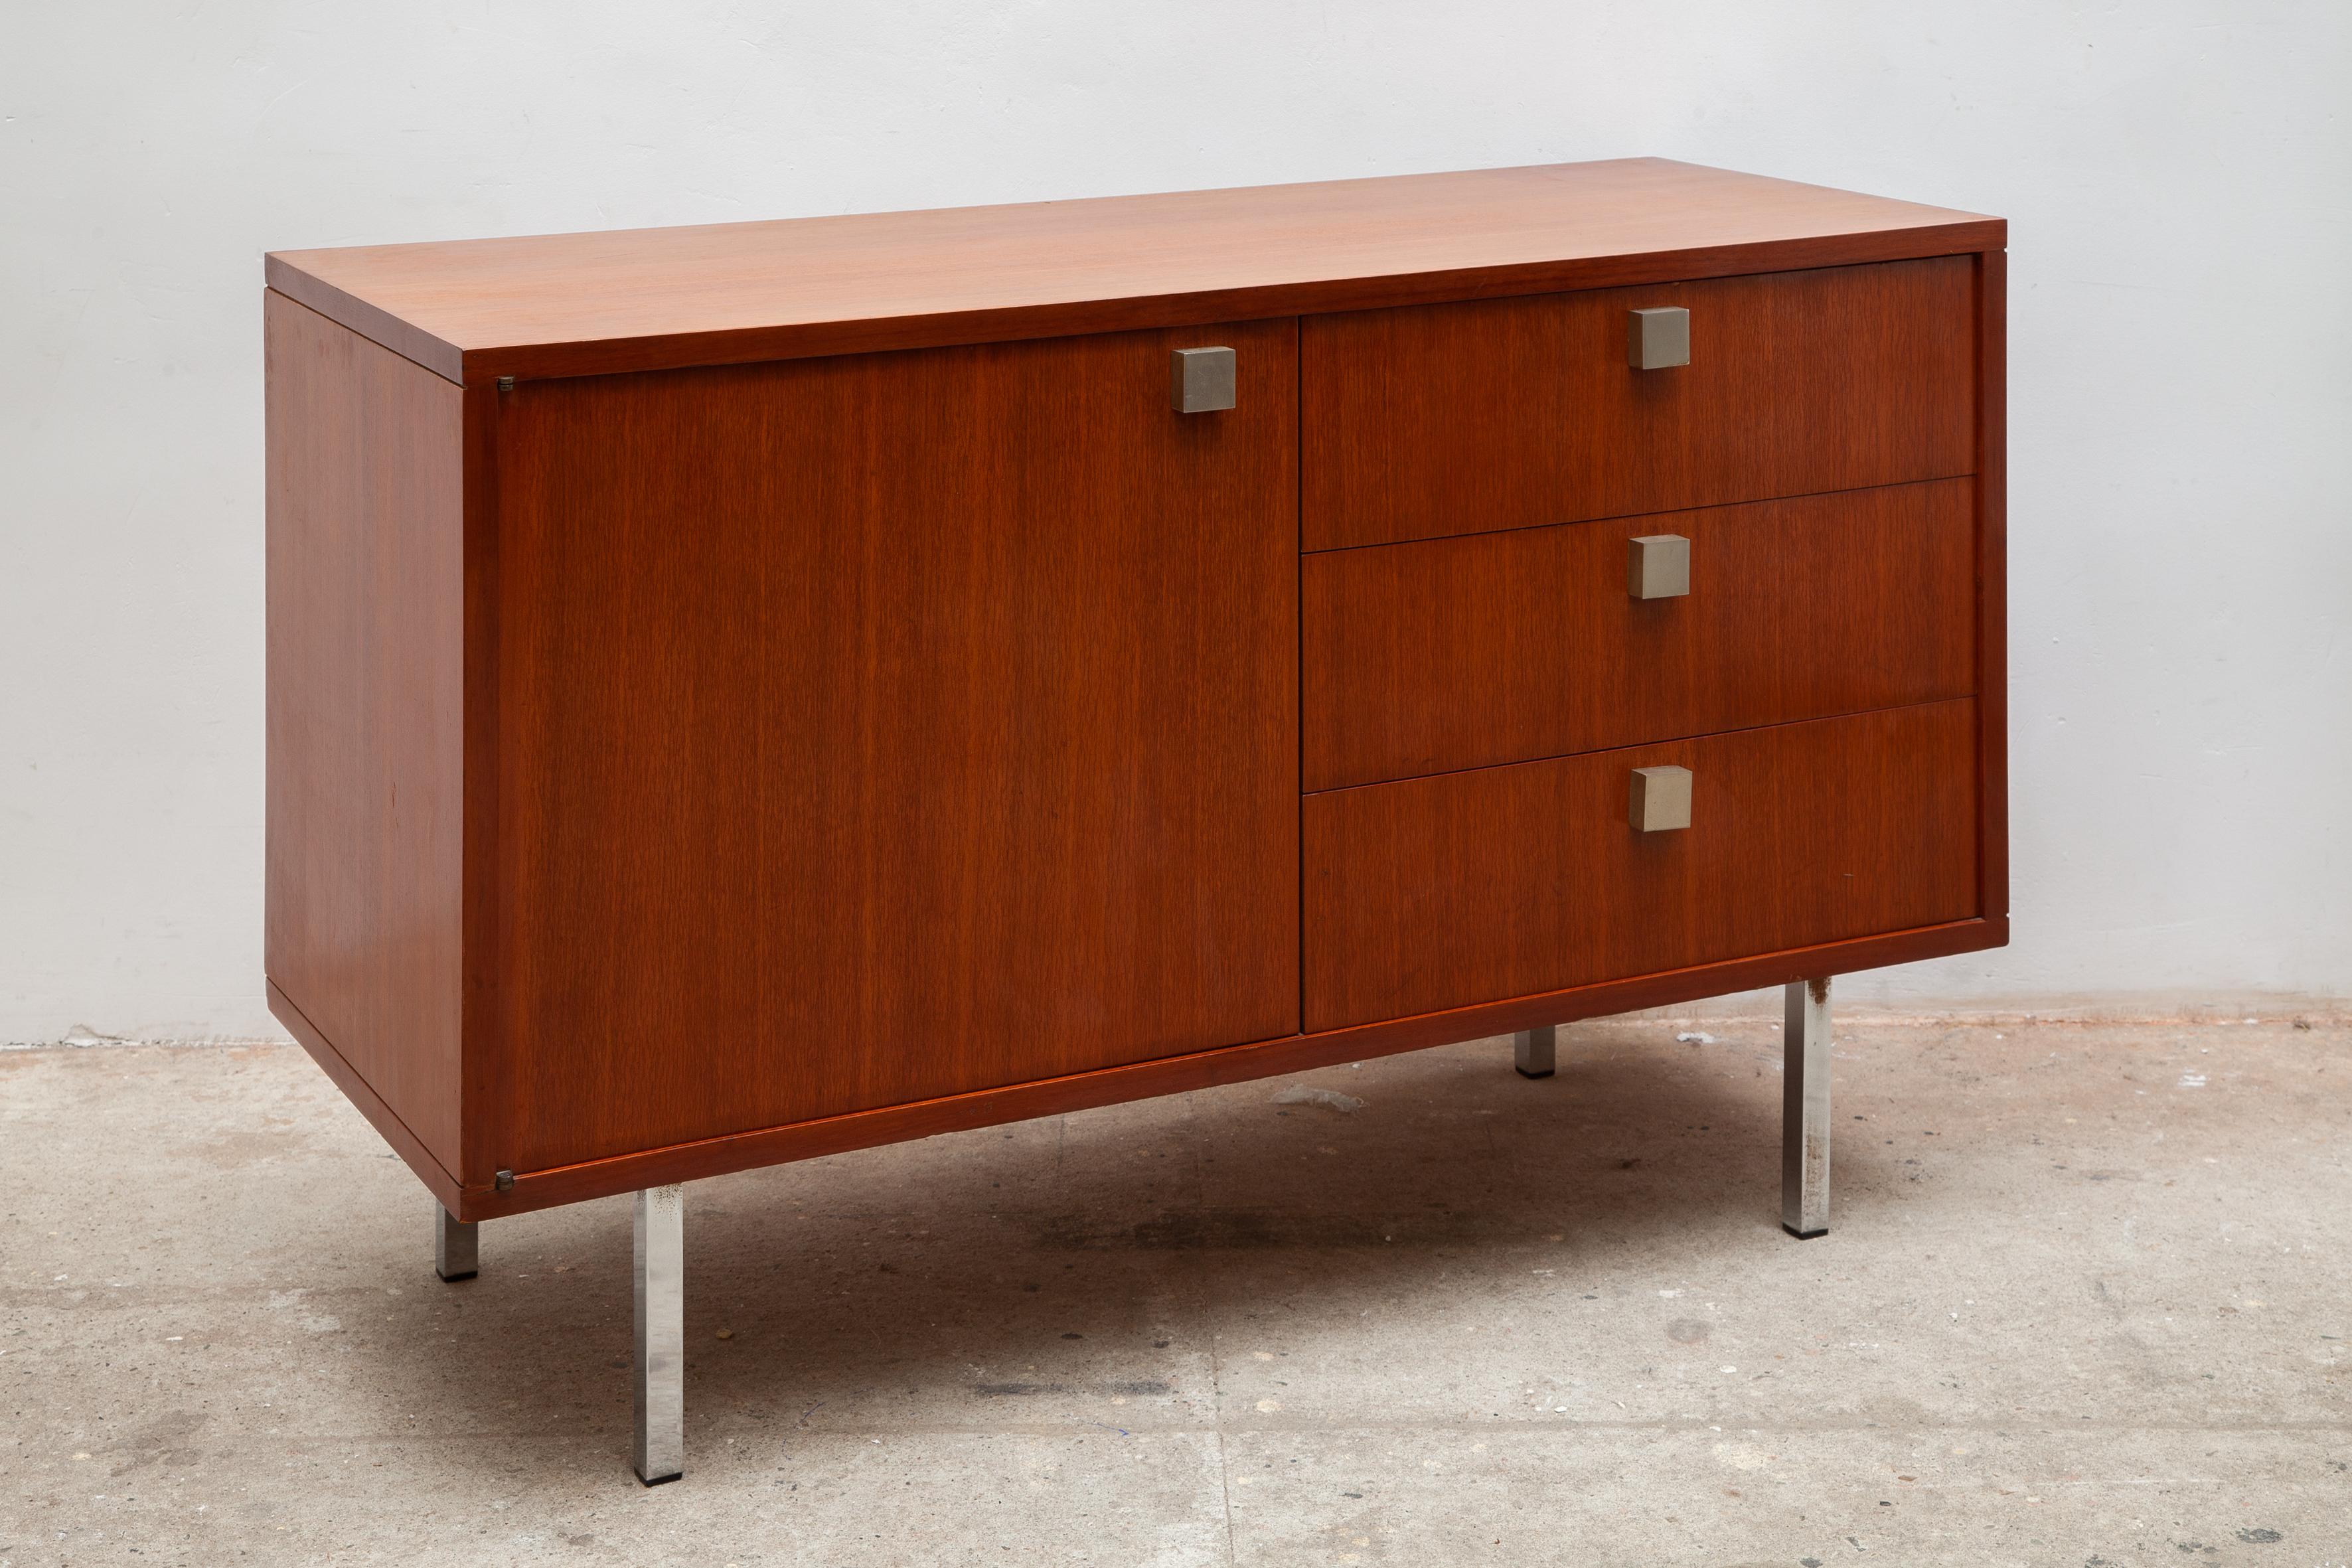 Hand-Crafted Alfred Hendrickx Small Sideboard for Belform, Belgium Design